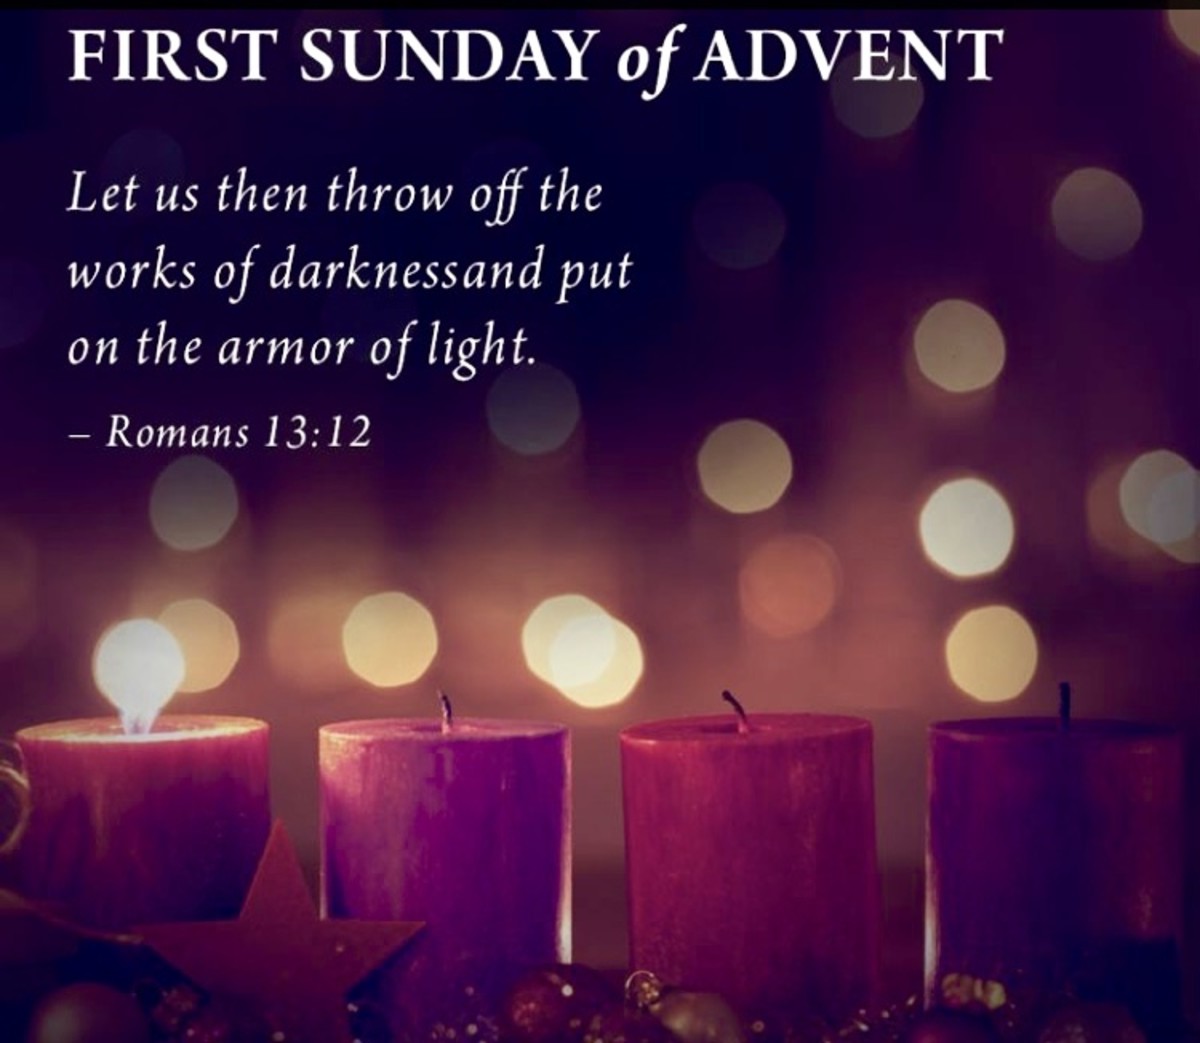 The First Sunday of Advent - HubPages